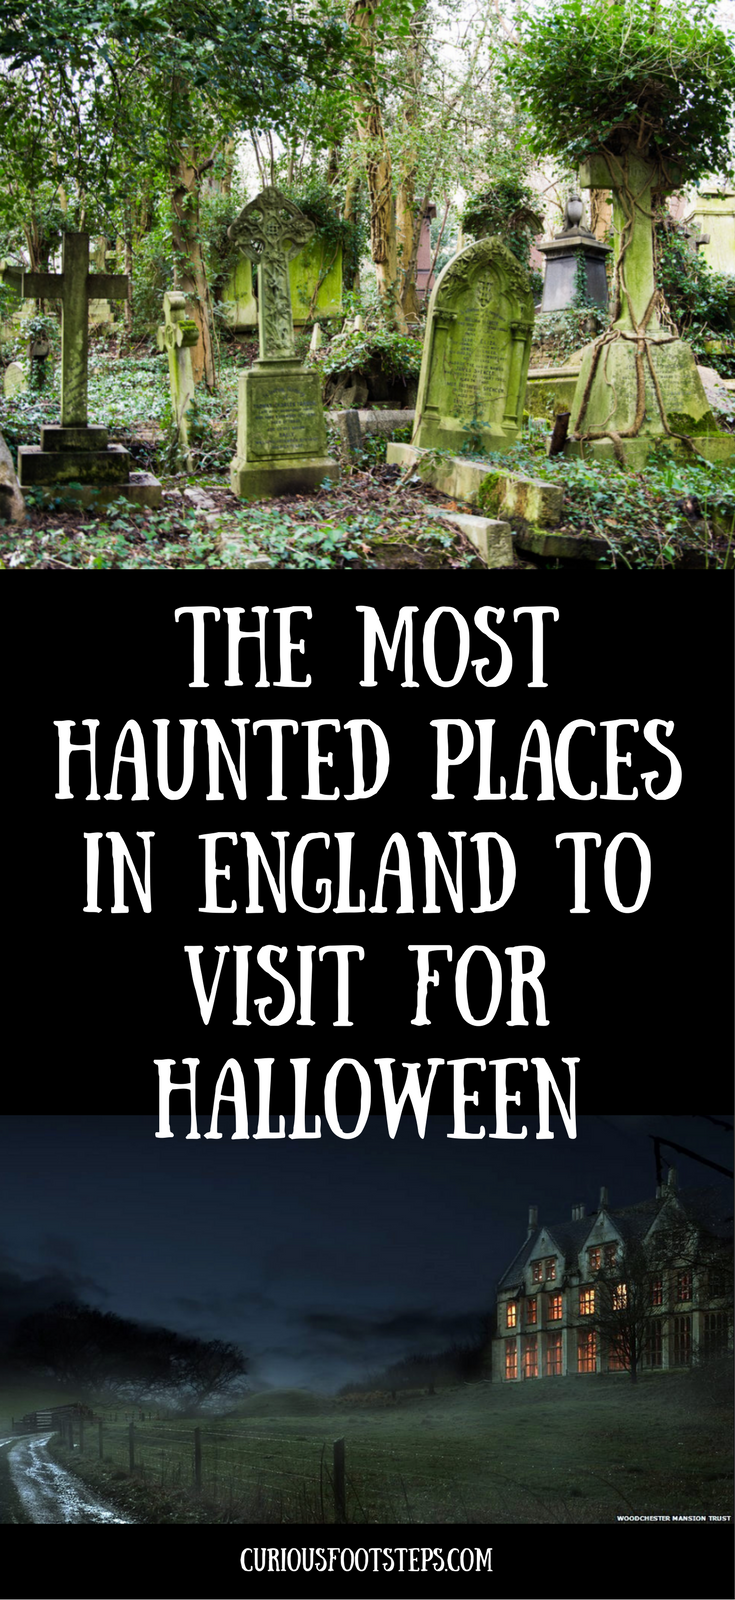 The most haunted places in england to visit for halloween